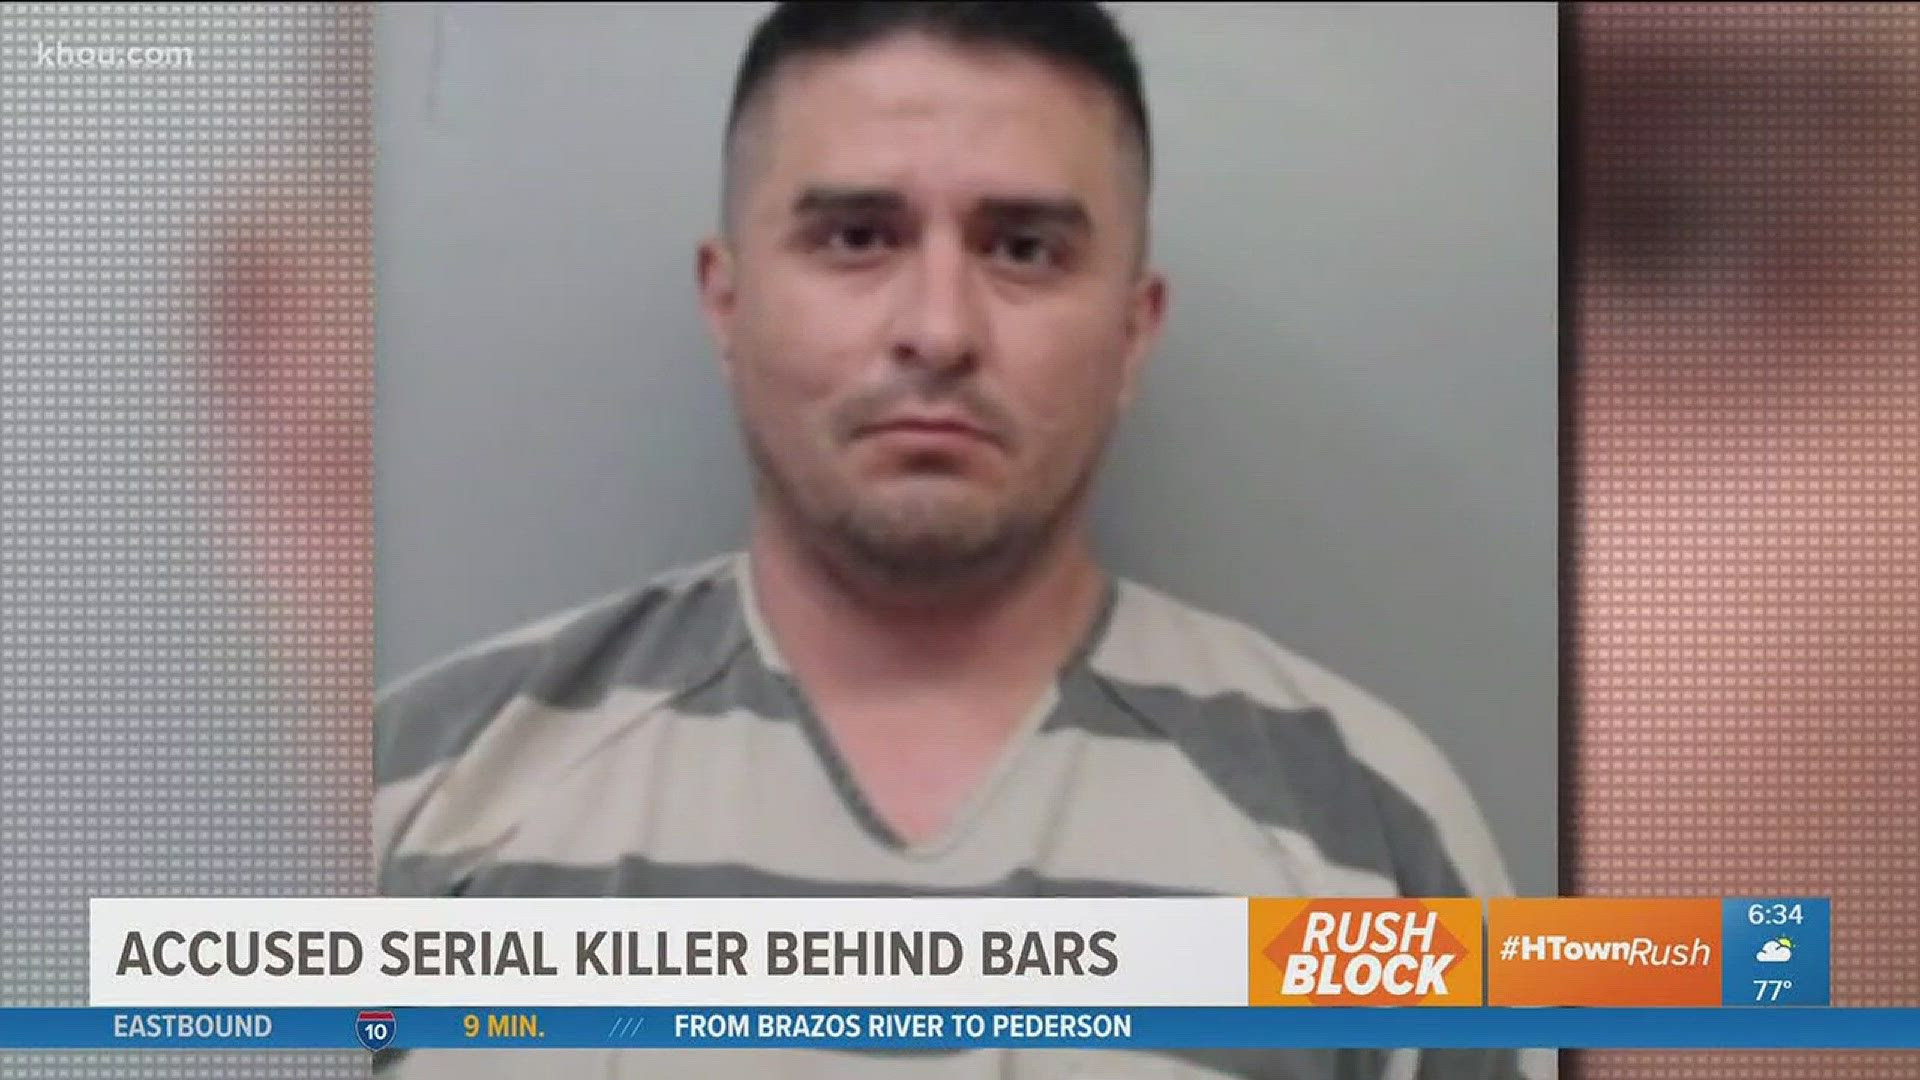 A Texas Border Patrol agent is behind bars after he was accused of kidnapping and killing four women in the Laredo area. Police said their break in solving this case came after the 5th victim escaped.